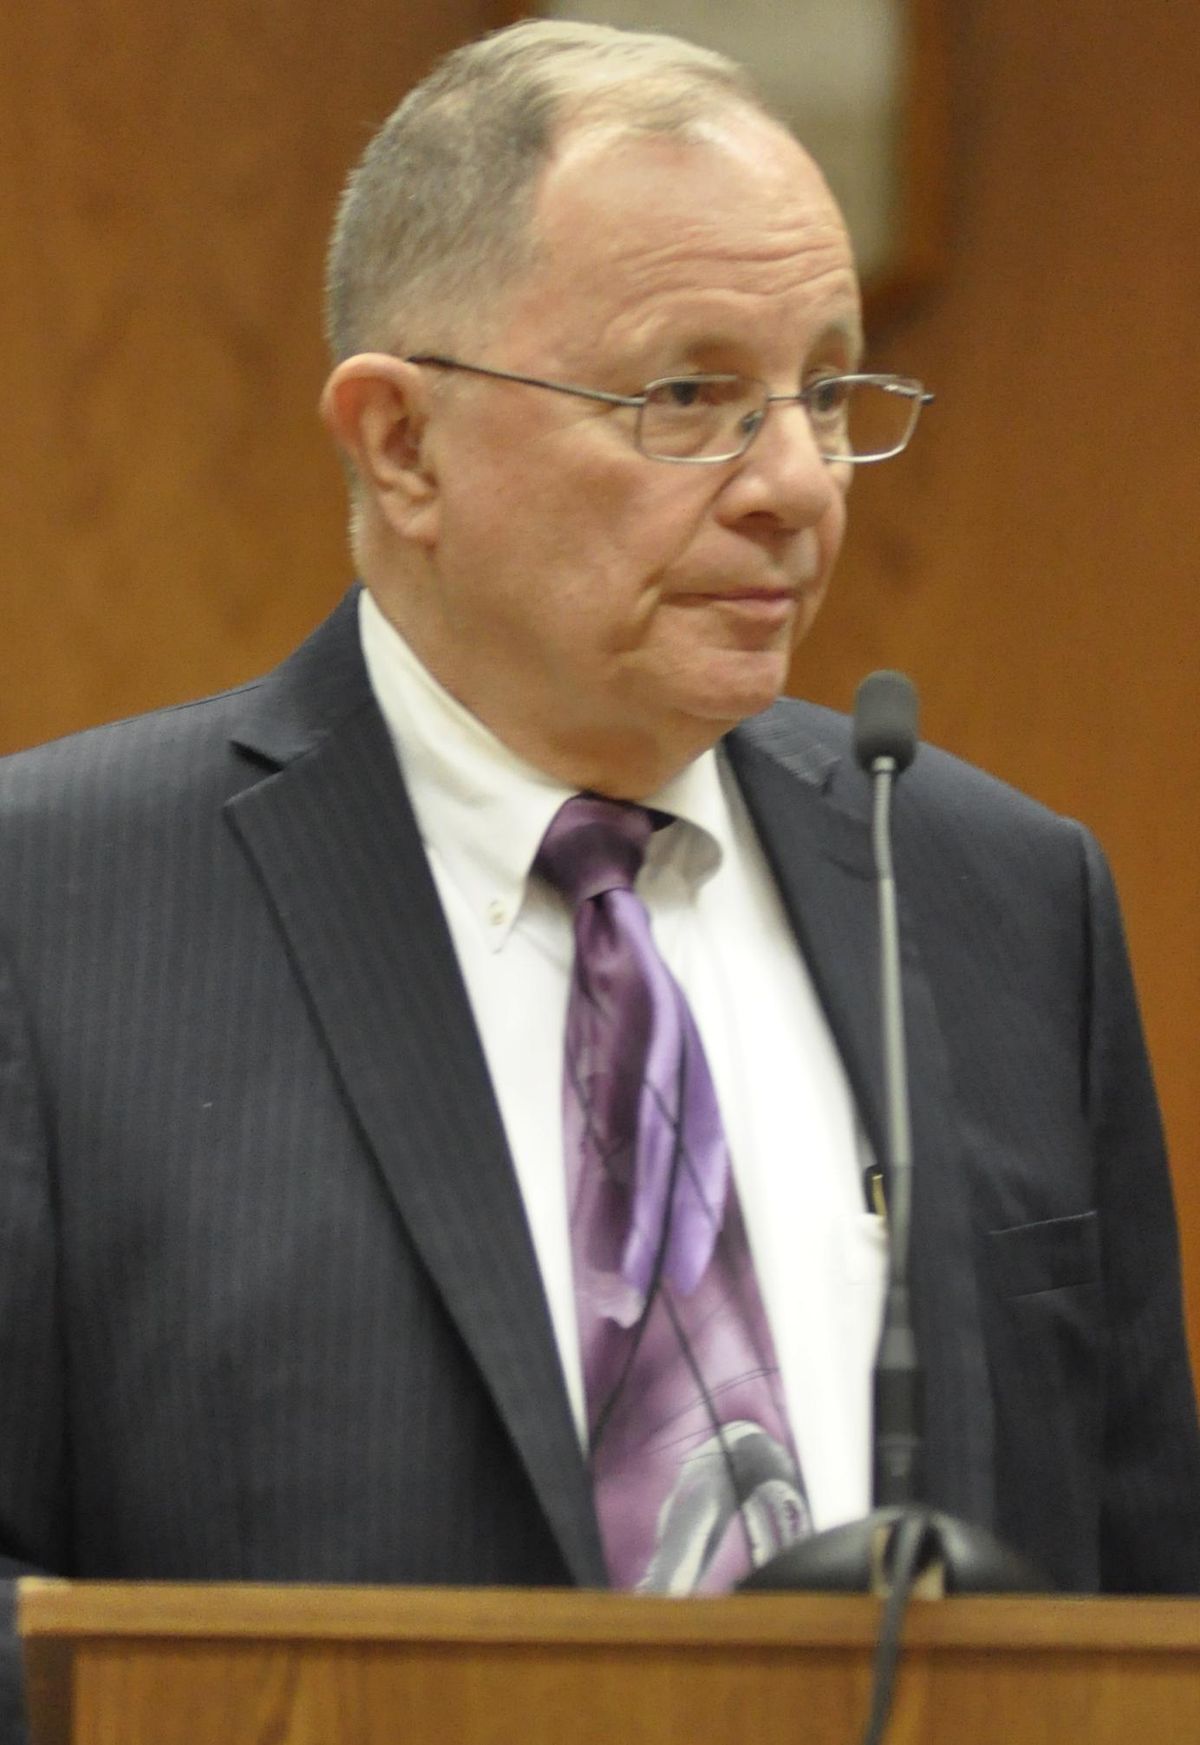 Sen. Mike Padden, R-Spokane Valley, announces lawmakers will subpoena records from Department of Corrections. (Jim Camden / The Spokesman-Review)